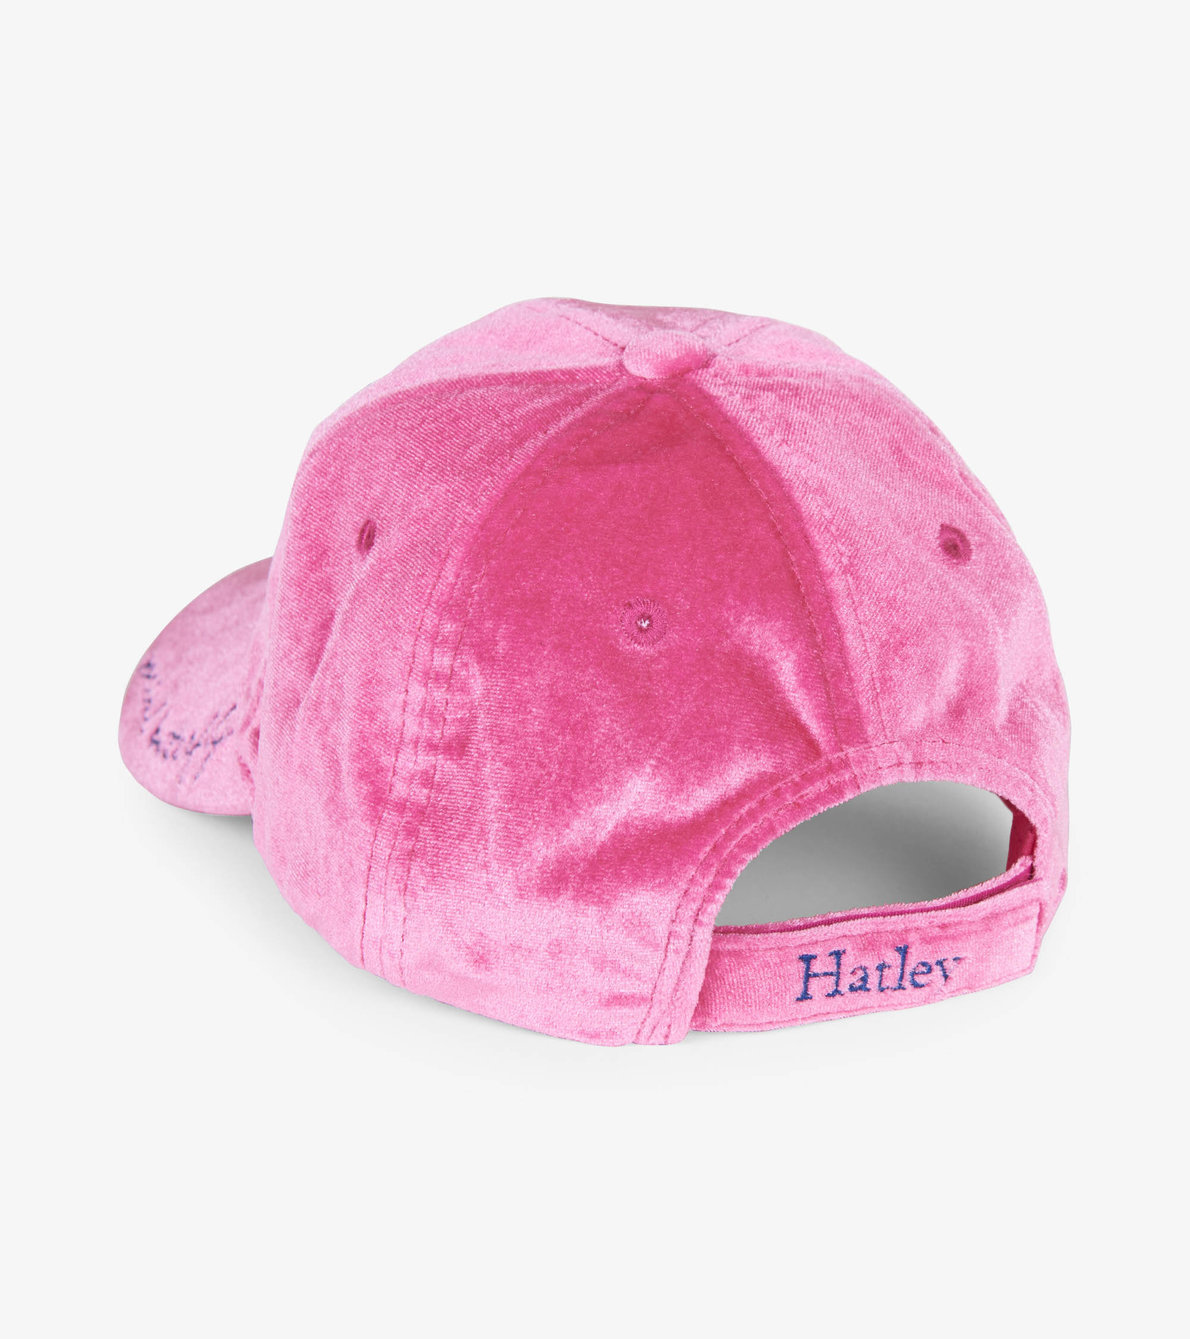 View larger image of Shimmer Butterfly Baseball Cap